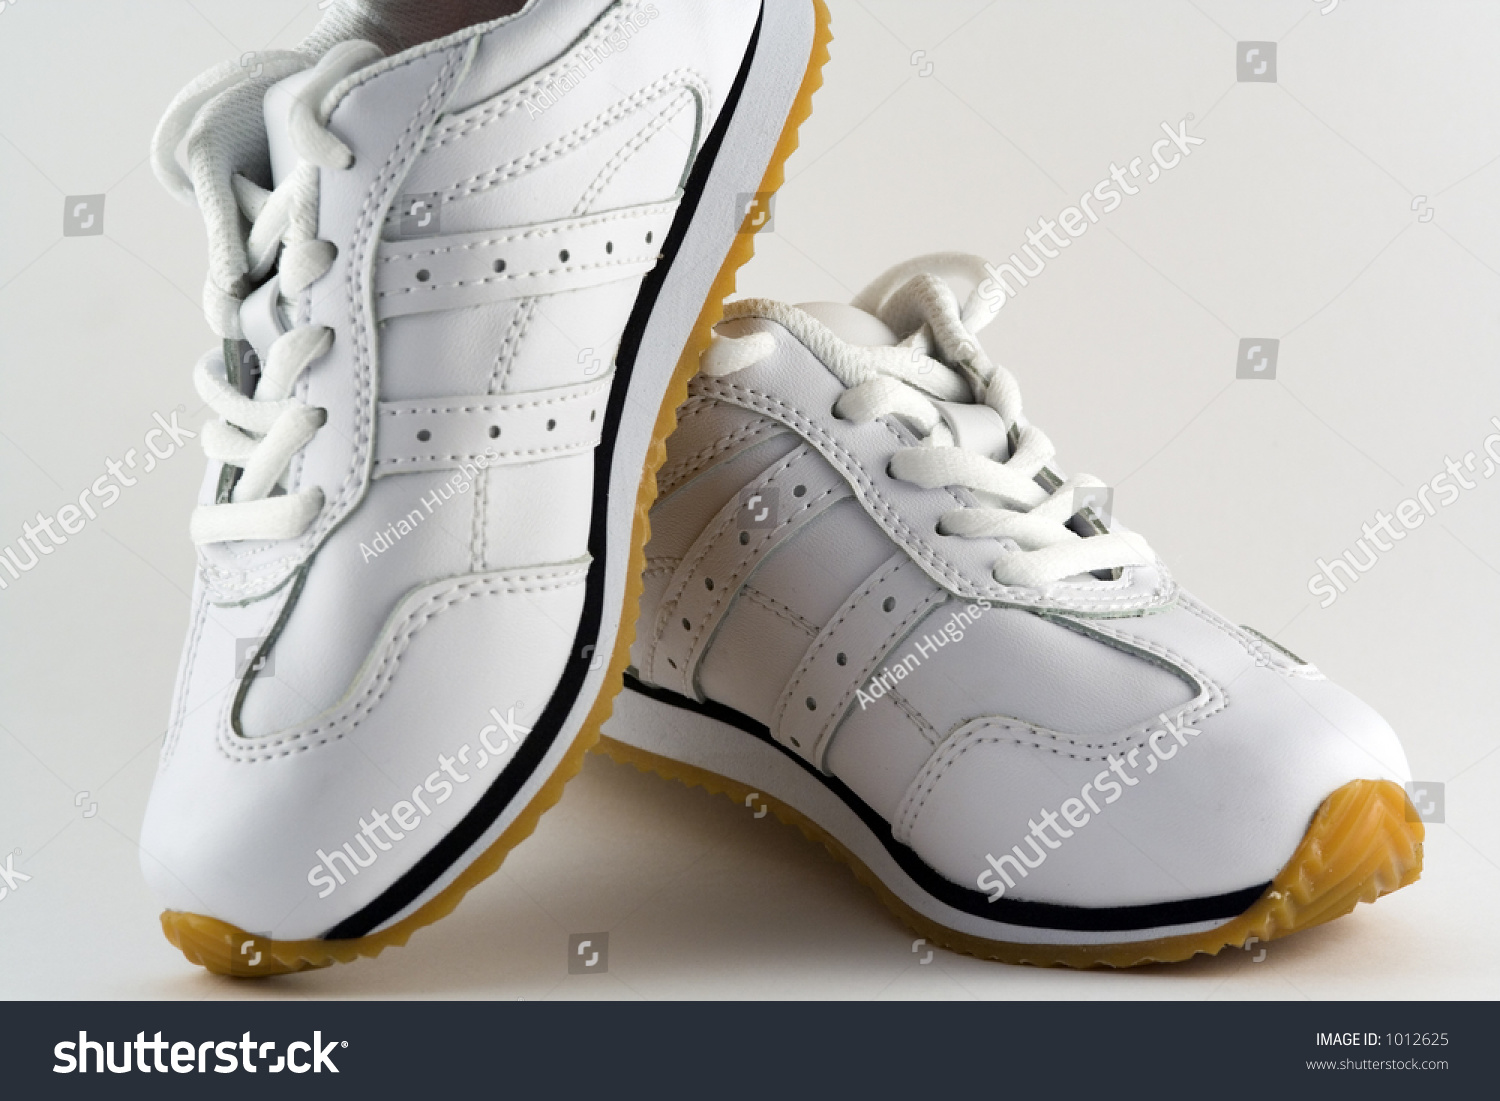 A Pair Of Trainers / Sneekers Stock Photo 1012625 : Shutterstock